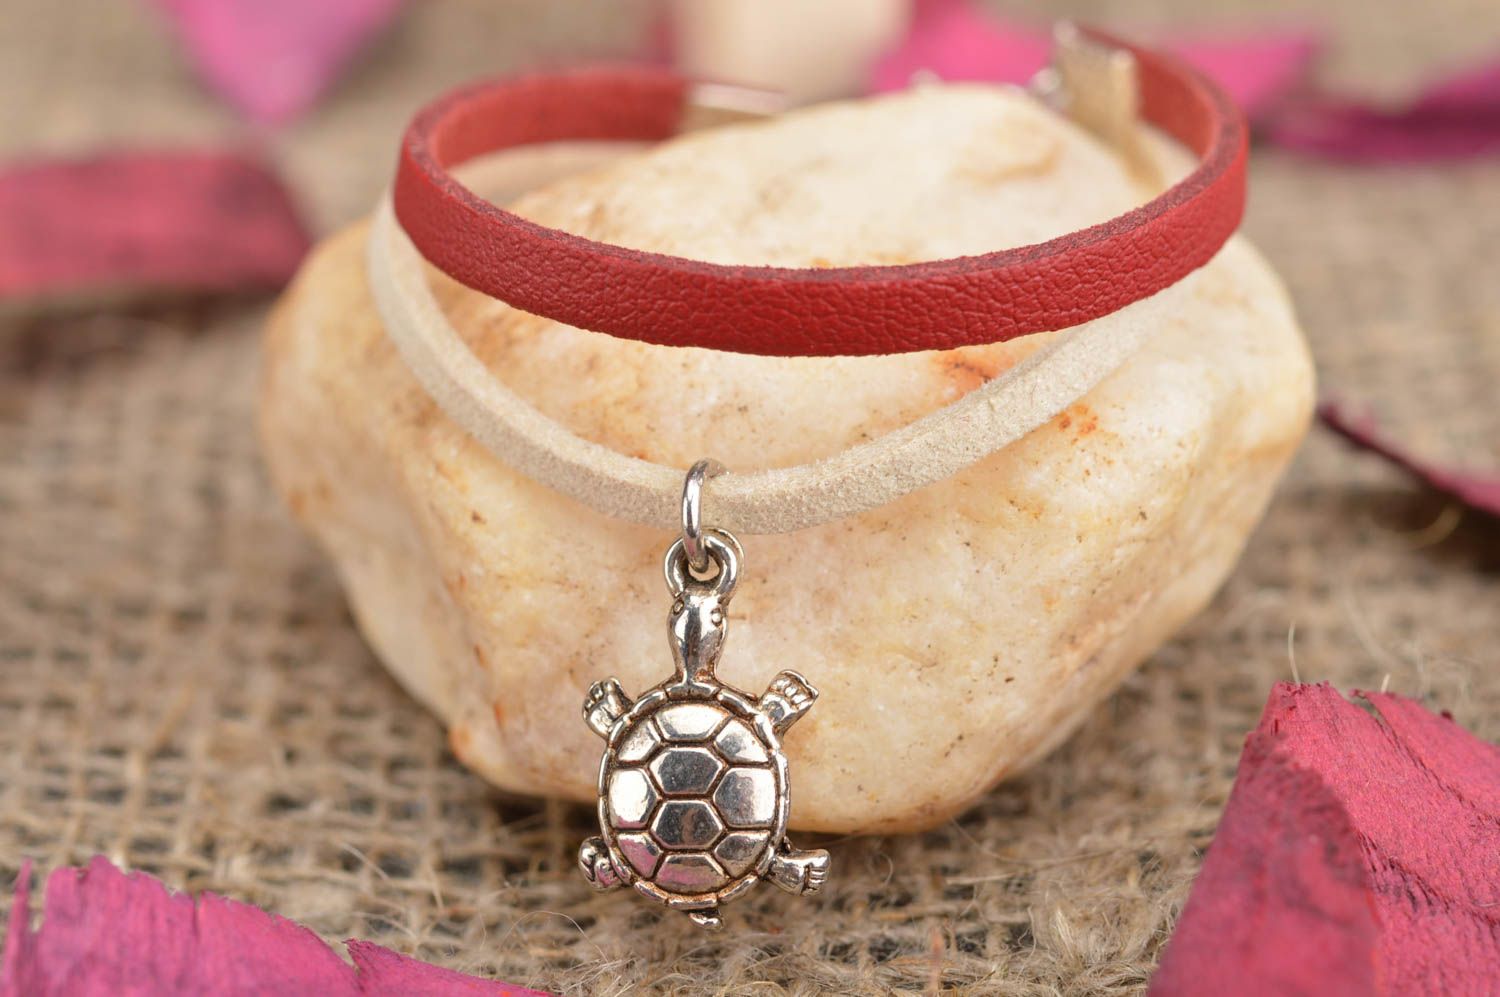 Handmade red and white leather wrist bracelet with turtle charm for kids photo 1